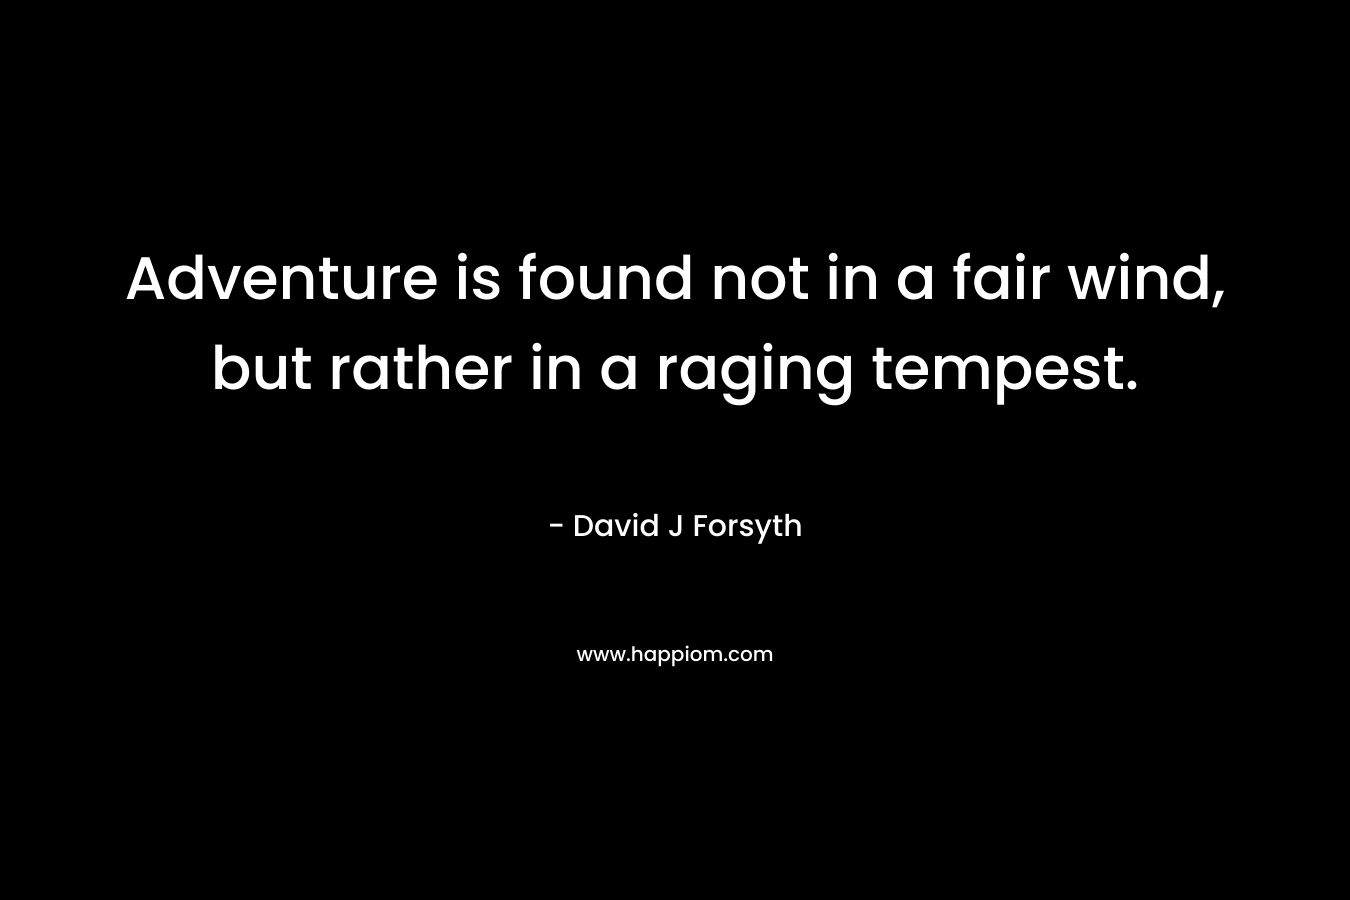 Adventure is found not in a fair wind, but rather in a raging tempest. – David J Forsyth